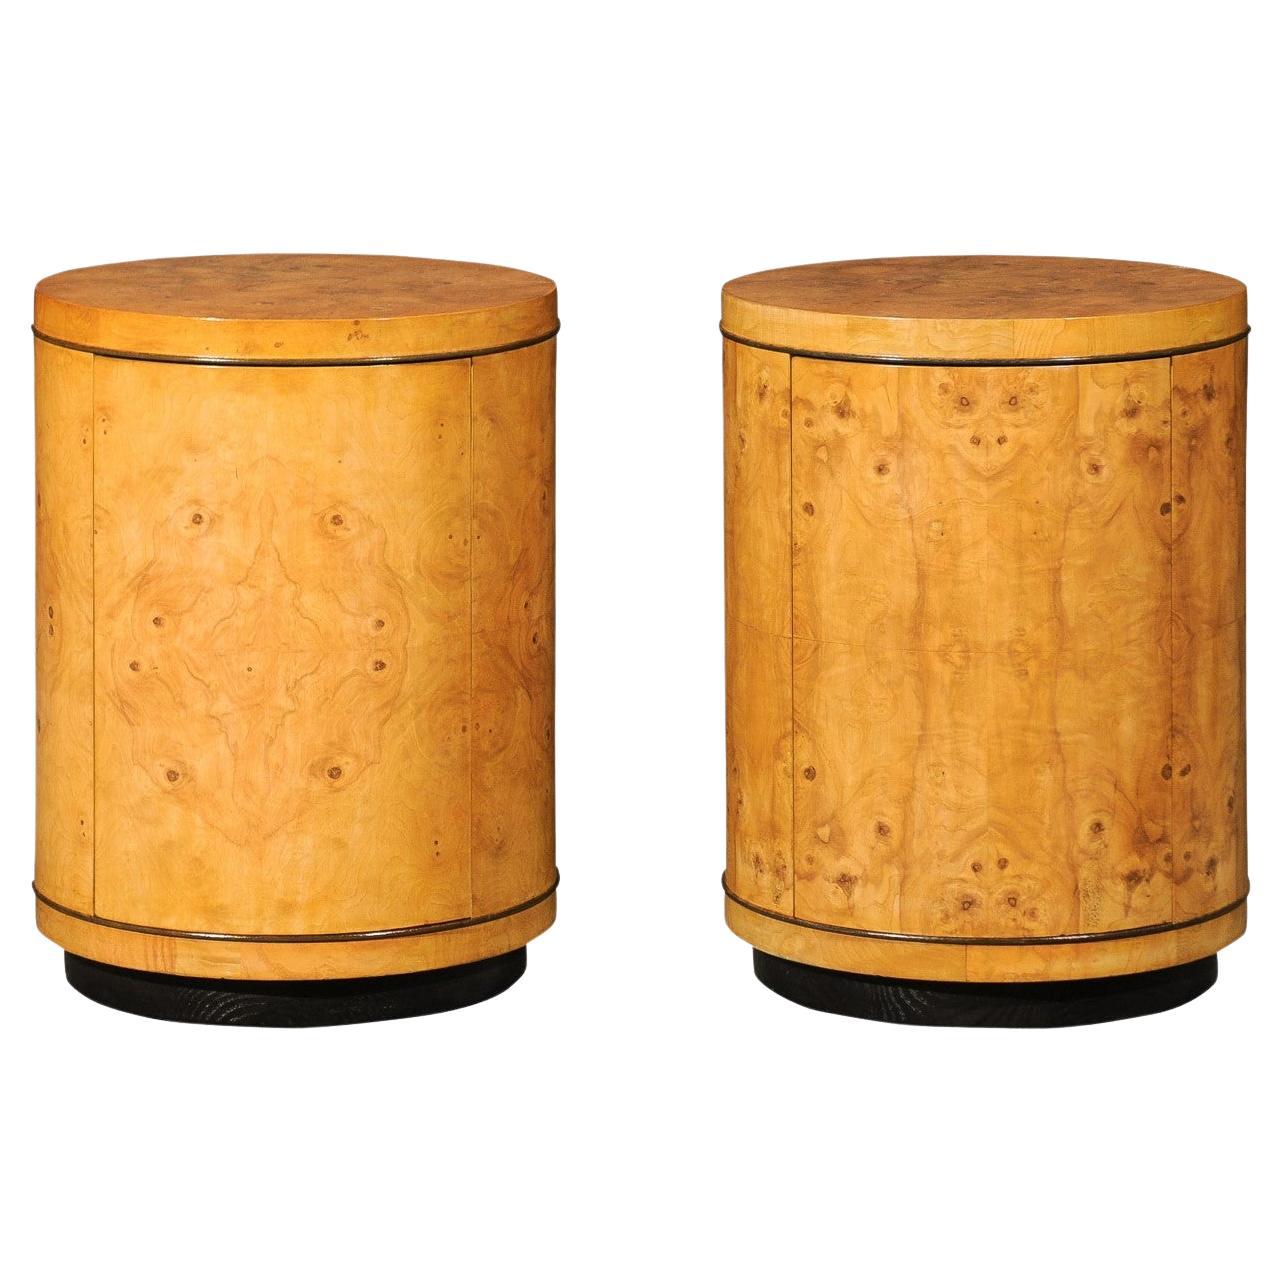 Gorgeous Pair of Bookmatch Olivewood Cylinder Cabinets by Henredon, circa 1980 For Sale